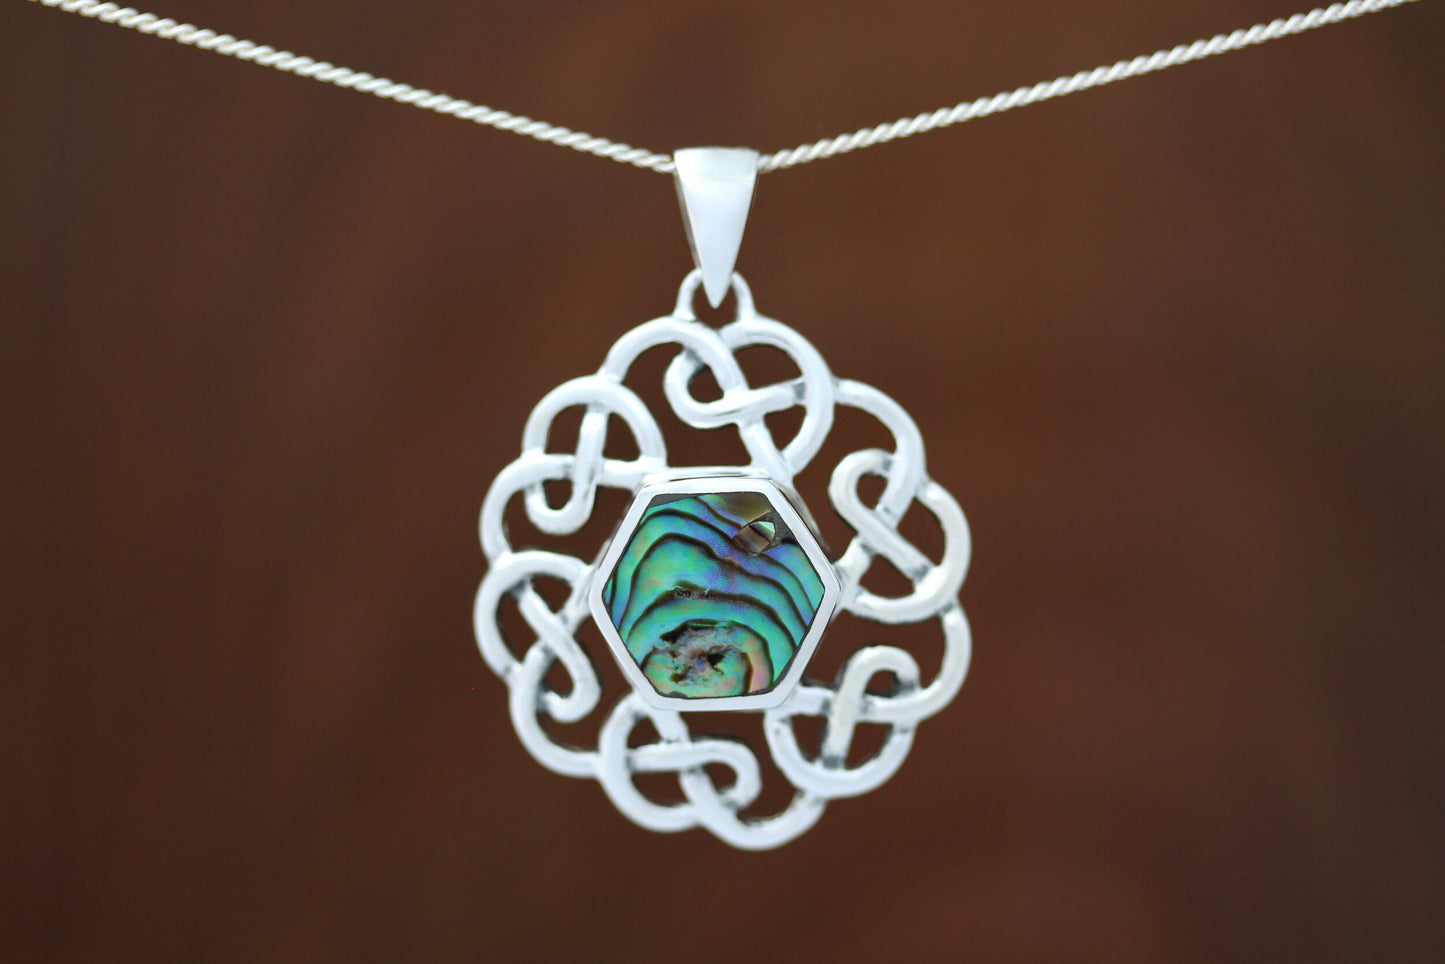 Celtic Stone Pendant - Six Knot with Abalone Shell (Two sizes available)